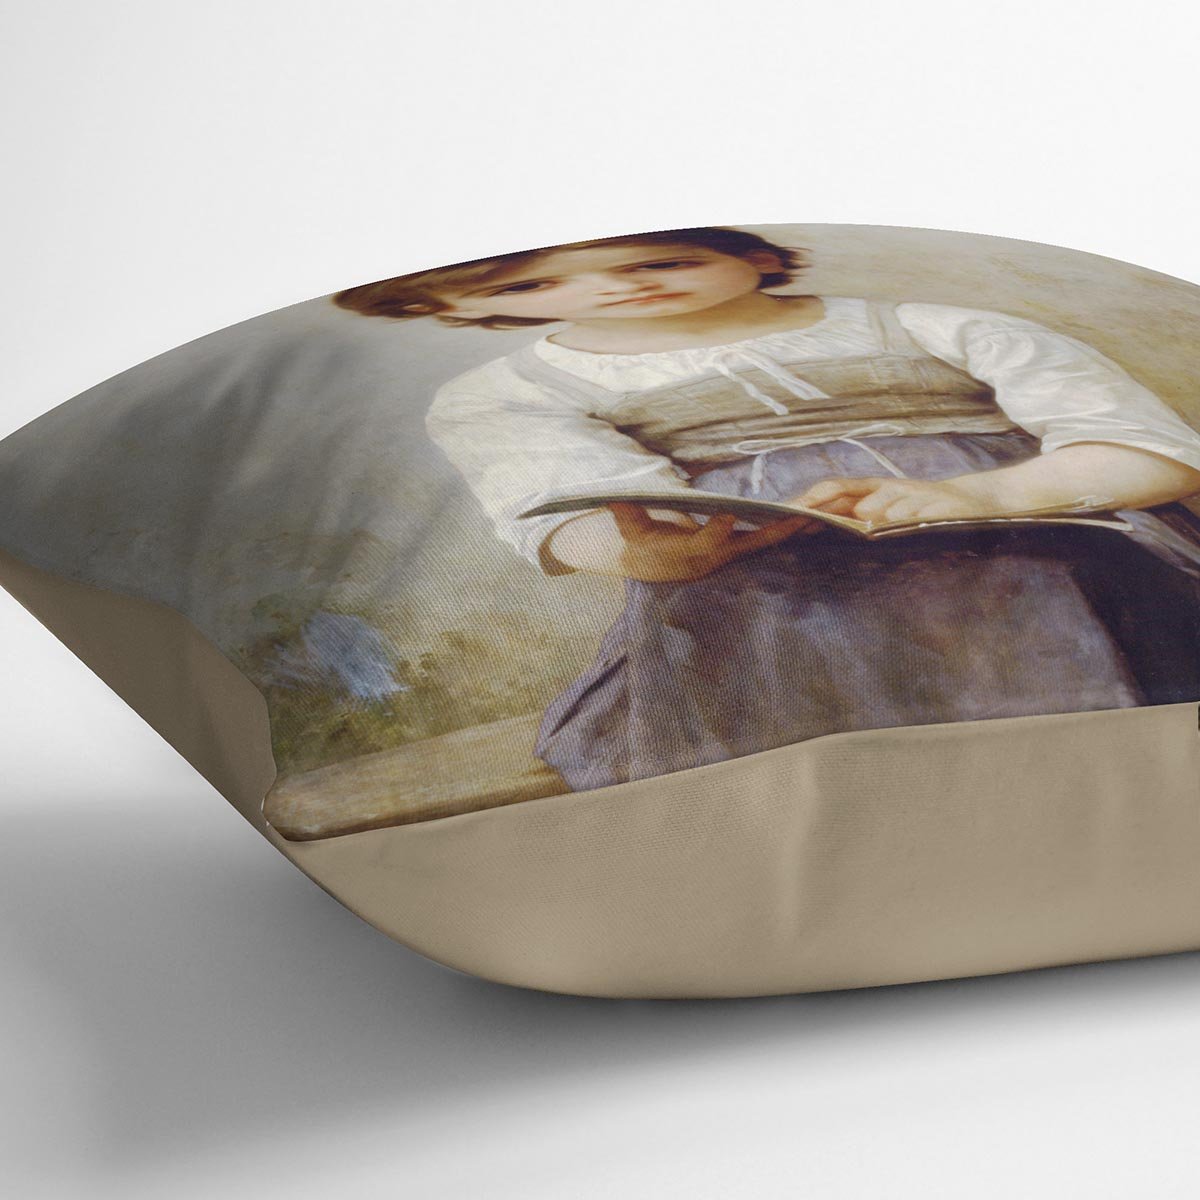 The Difficult Lesson By Bouguereau Throw Pillow